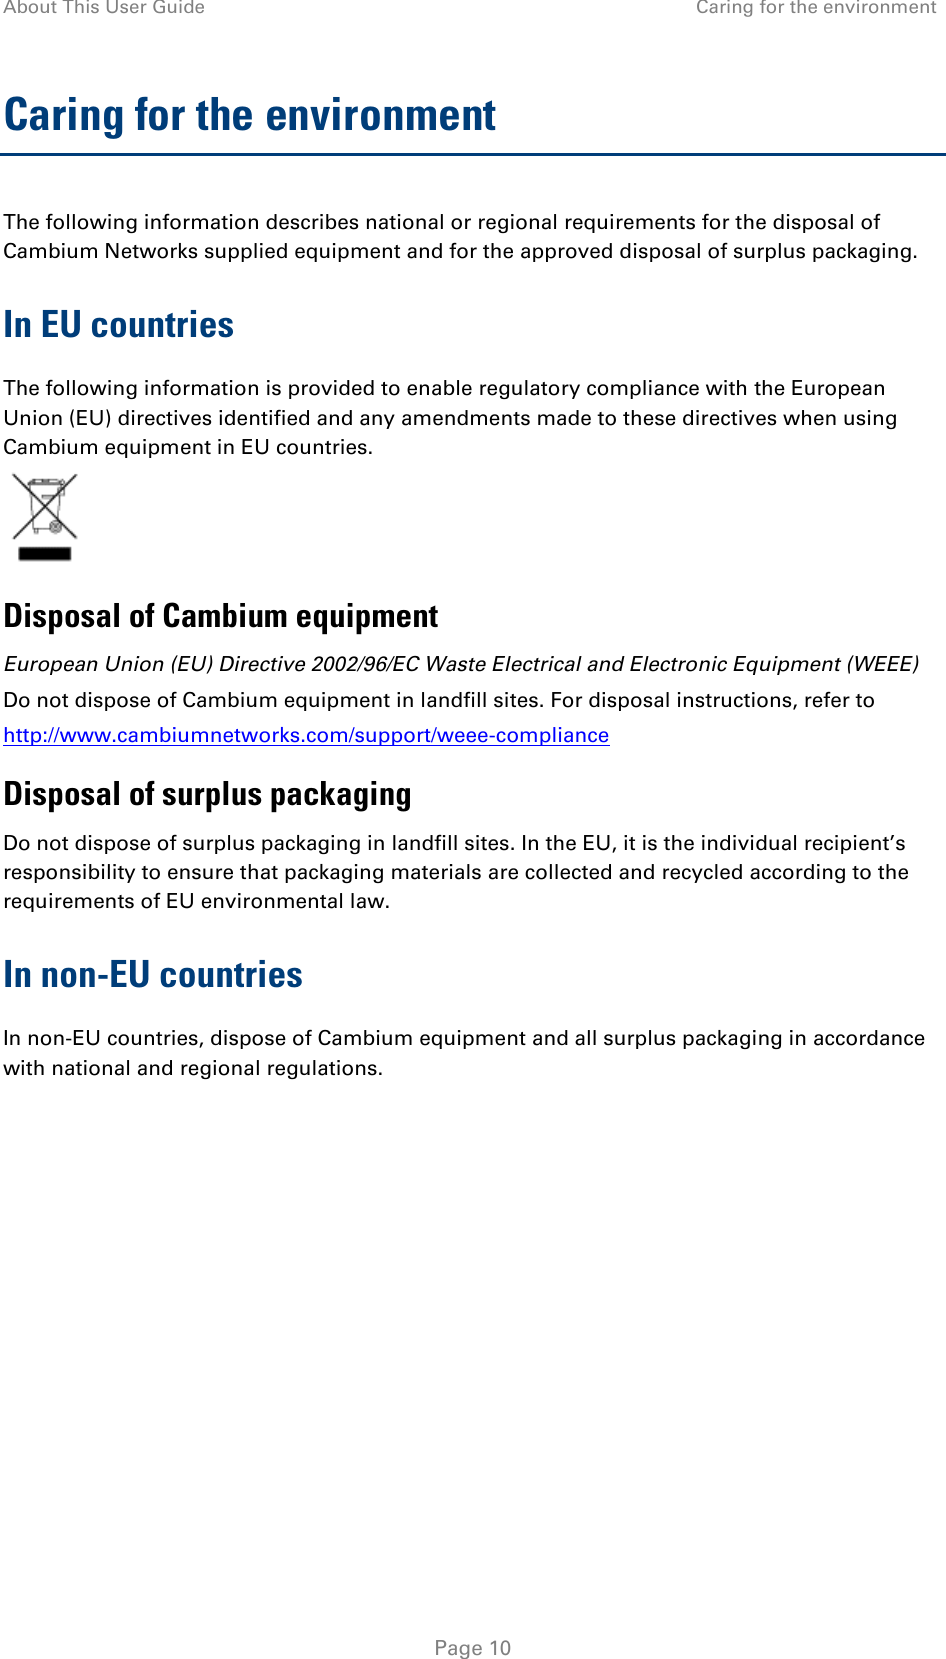 About This User Guide Caring for the environment  Caring for the environment The following information describes national or regional requirements for the disposal of Cambium Networks supplied equipment and for the approved disposal of surplus packaging. In EU countries The following information is provided to enable regulatory compliance with the European Union (EU) directives identified and any amendments made to these directives when using Cambium equipment in EU countries.  Disposal of Cambium equipment European Union (EU) Directive 2002/96/EC Waste Electrical and Electronic Equipment (WEEE) Do not dispose of Cambium equipment in landfill sites. For disposal instructions, refer to  http://www.cambiumnetworks.com/support/weee-compliance Disposal of surplus packaging Do not dispose of surplus packaging in landfill sites. In the EU, it is the individual recipient’s responsibility to ensure that packaging materials are collected and recycled according to the requirements of EU environmental law. In non-EU countries In non-EU countries, dispose of Cambium equipment and all surplus packaging in accordance with national and regional regulations.    Page 10 